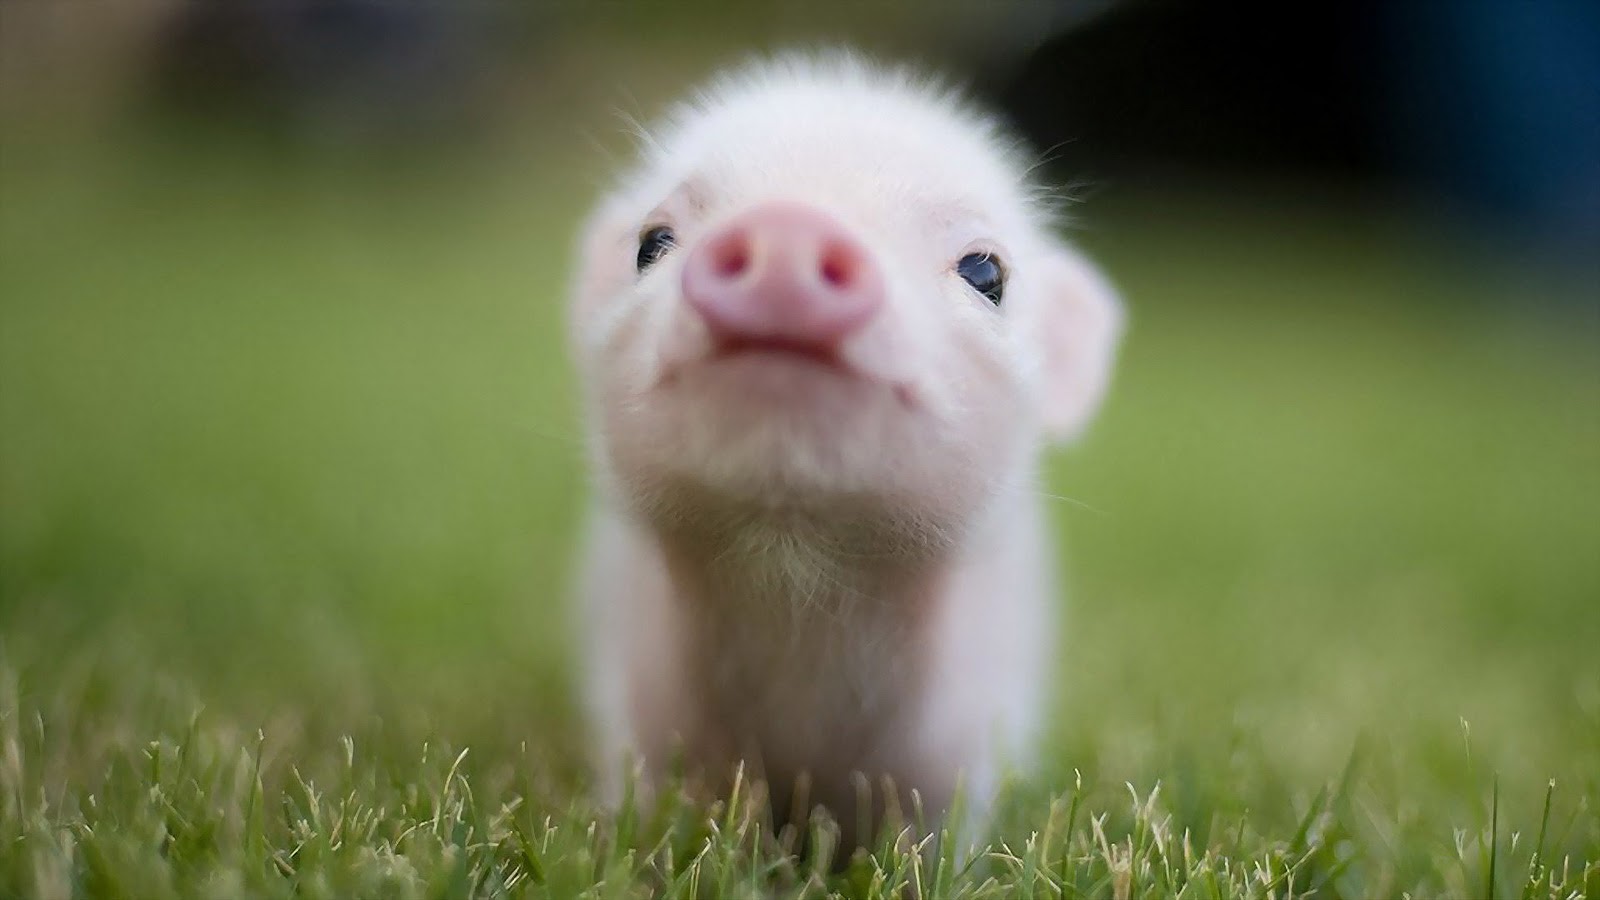 Cute Baby Pigs 11278 Hd Wallpapers in Animals   Imagescicom